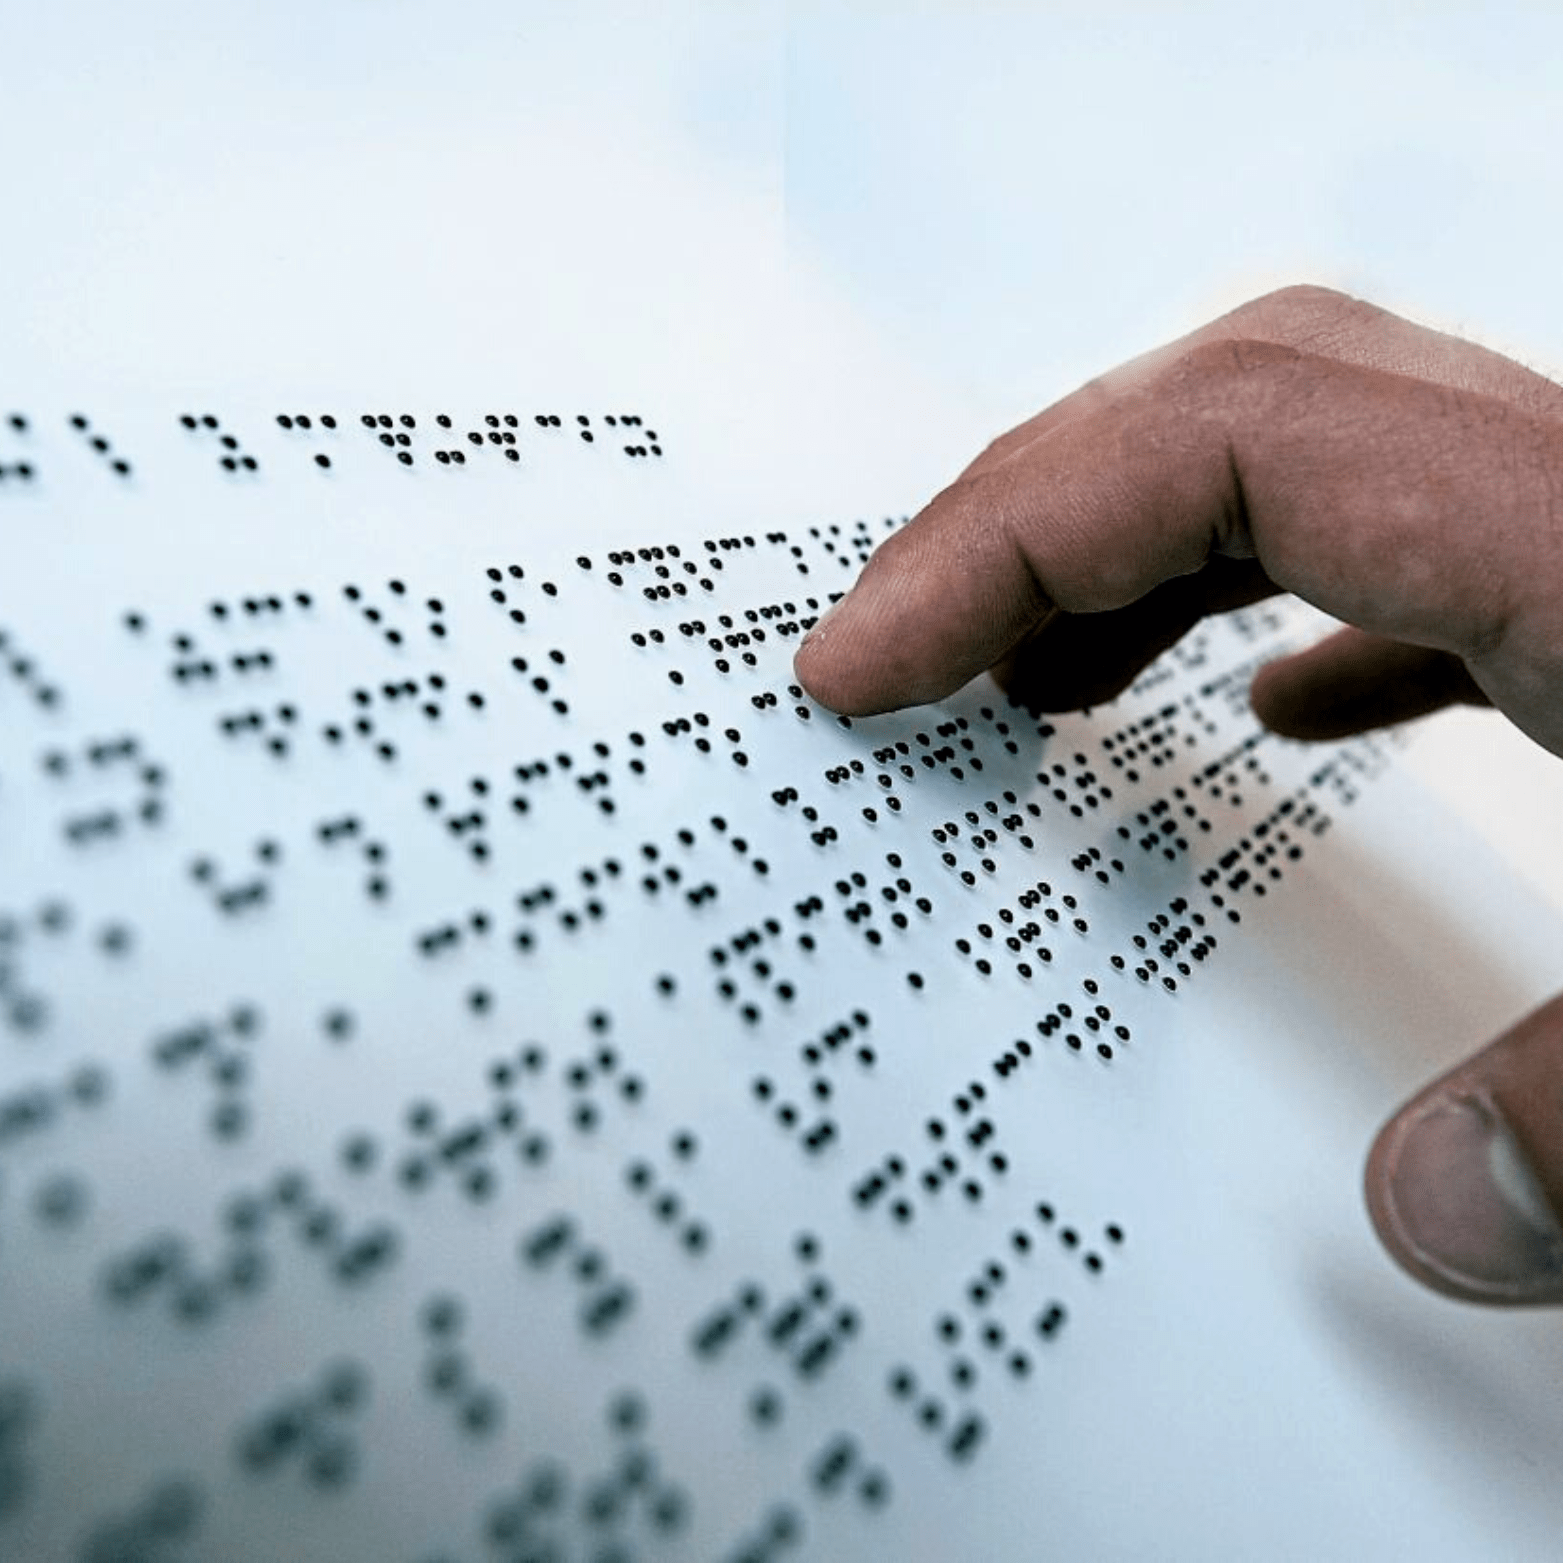 A blind person using brail